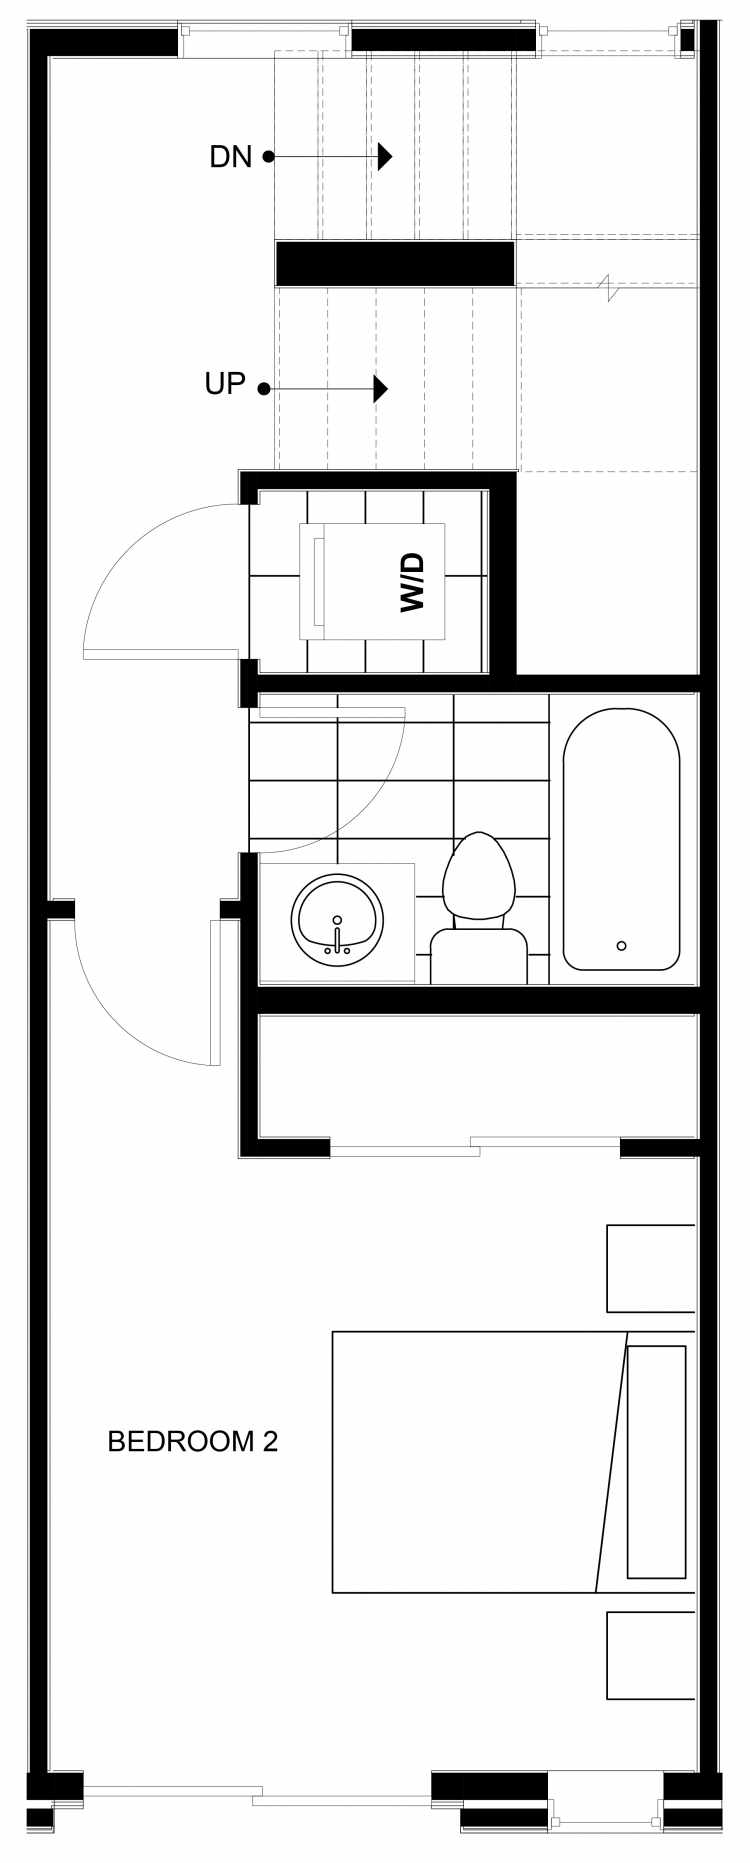 Third Floor Plan of 1540 15th Ave E, One of the Larrabee Townhomes in Capitol Hill